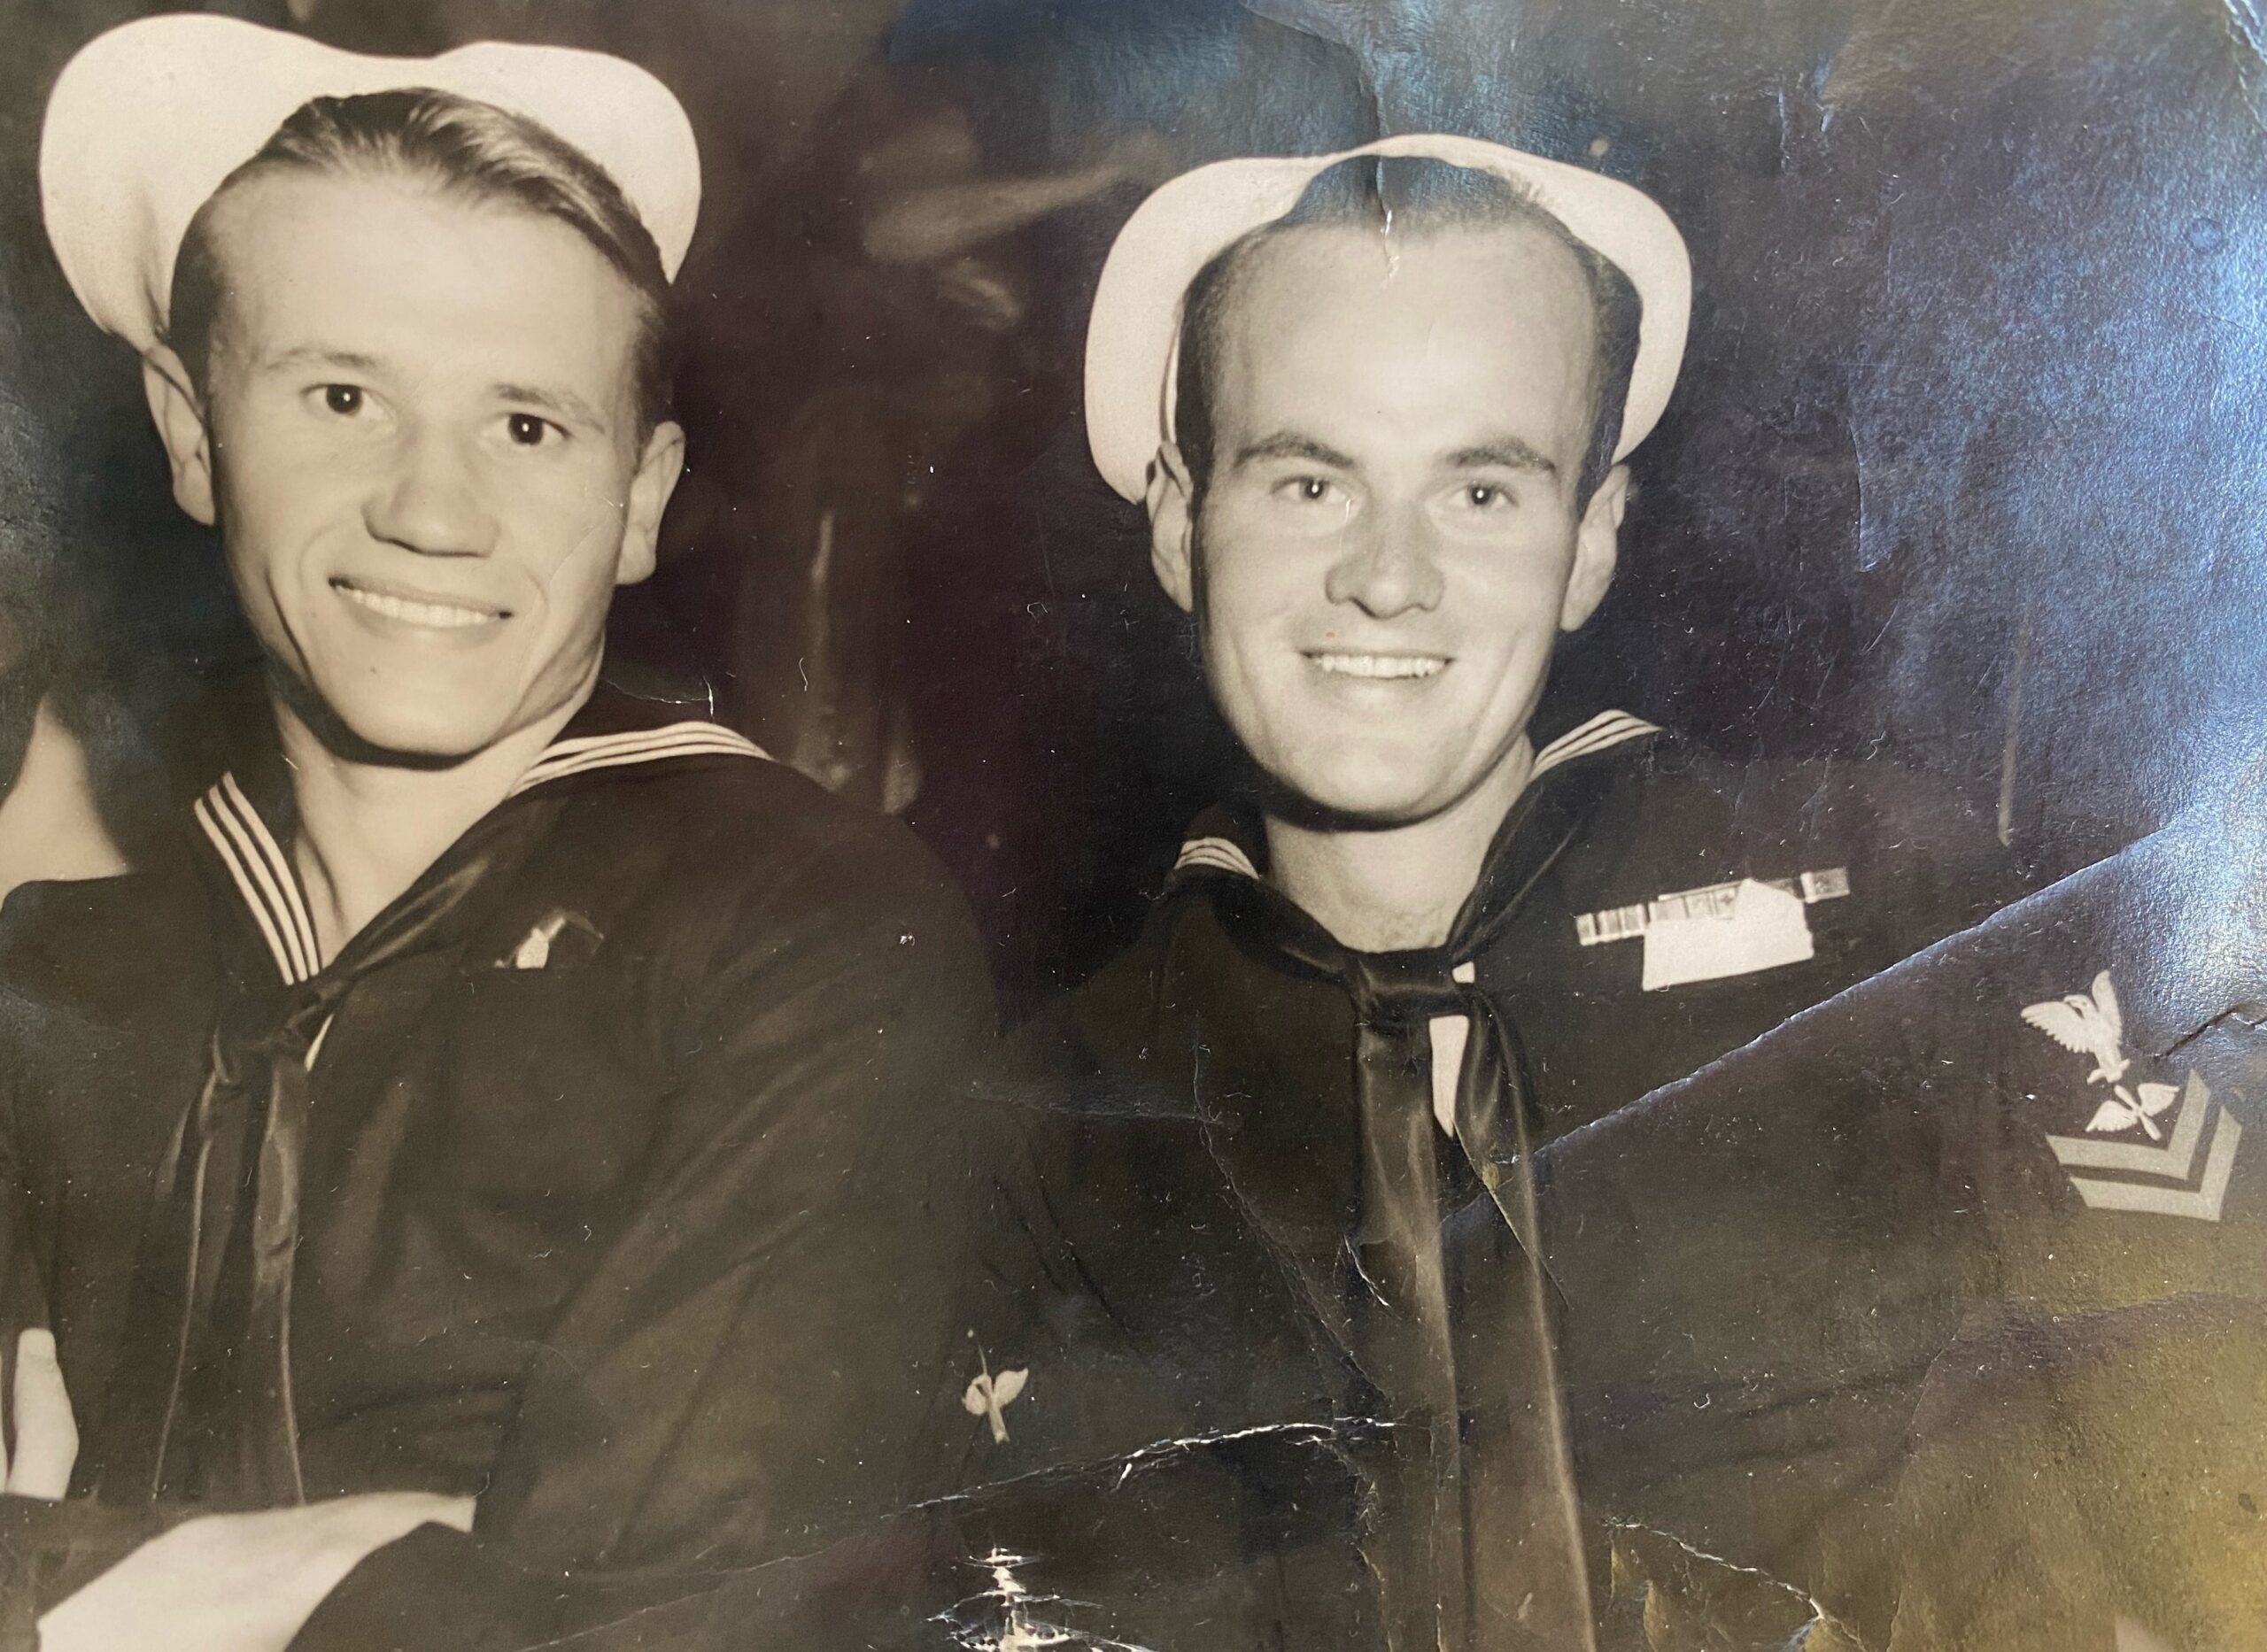 Ed Collins with 2nd Class Petty Officer Bill Montgomery from USS San Jacinto (CVL-30)